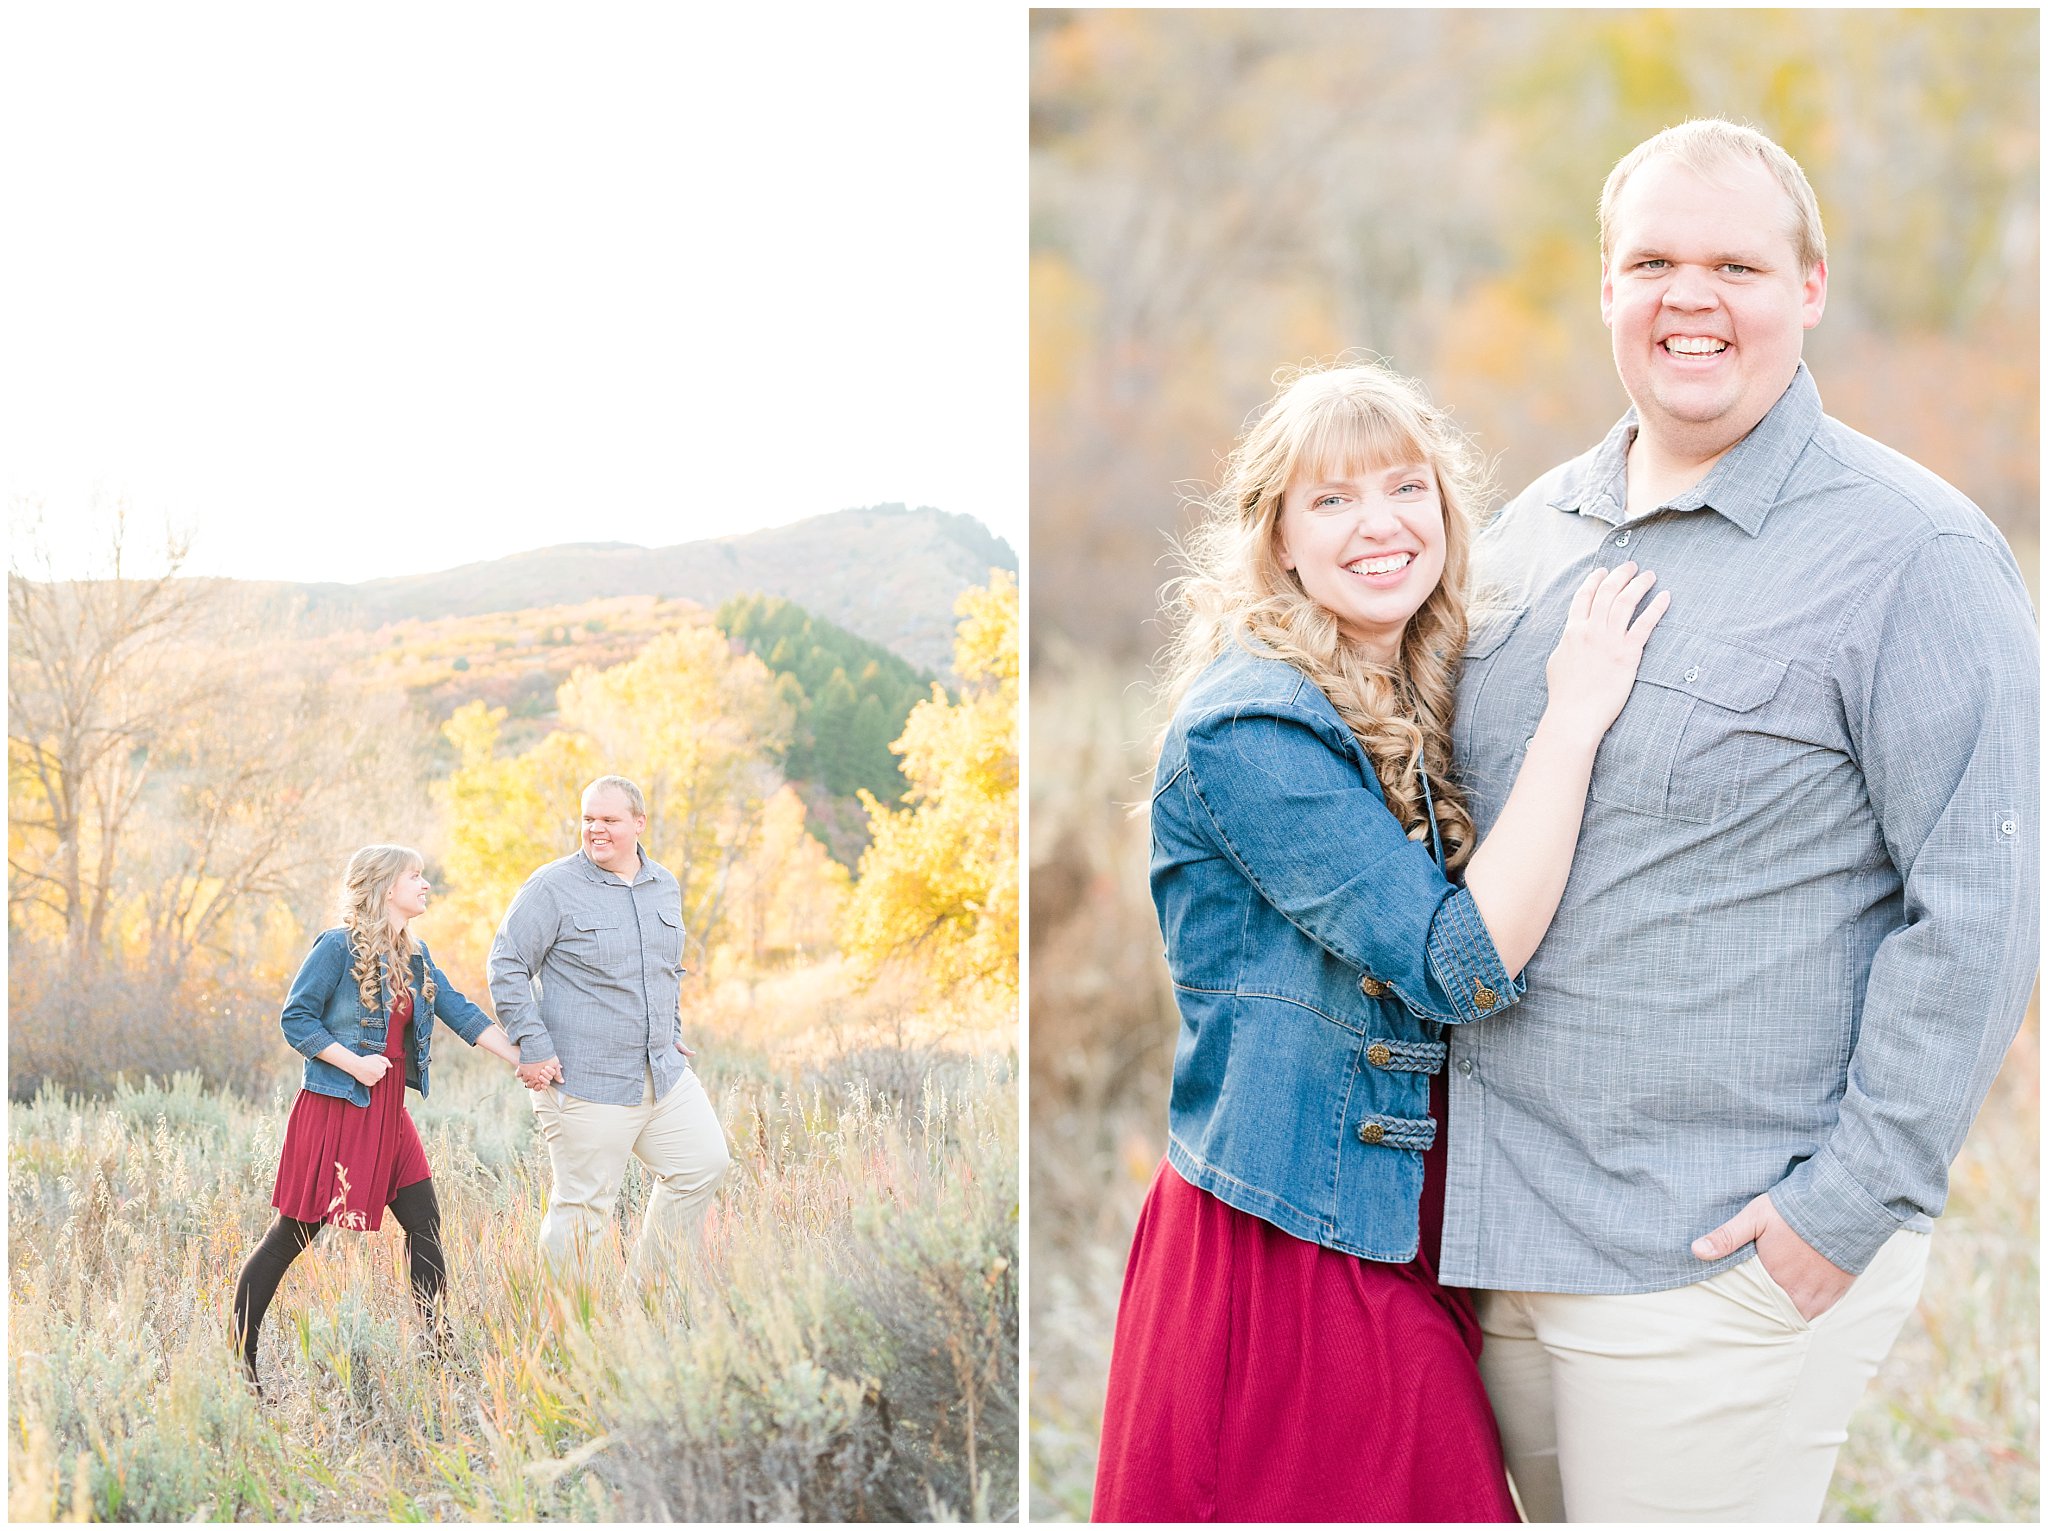 Couple dressed up with girl in burgundy dress with jean jacket and guy in grey shirt and light colored pants | Trapper's Loop Fall Engagement Session | Snowbasin Utah Mountains | Jessie and Dallin Photography